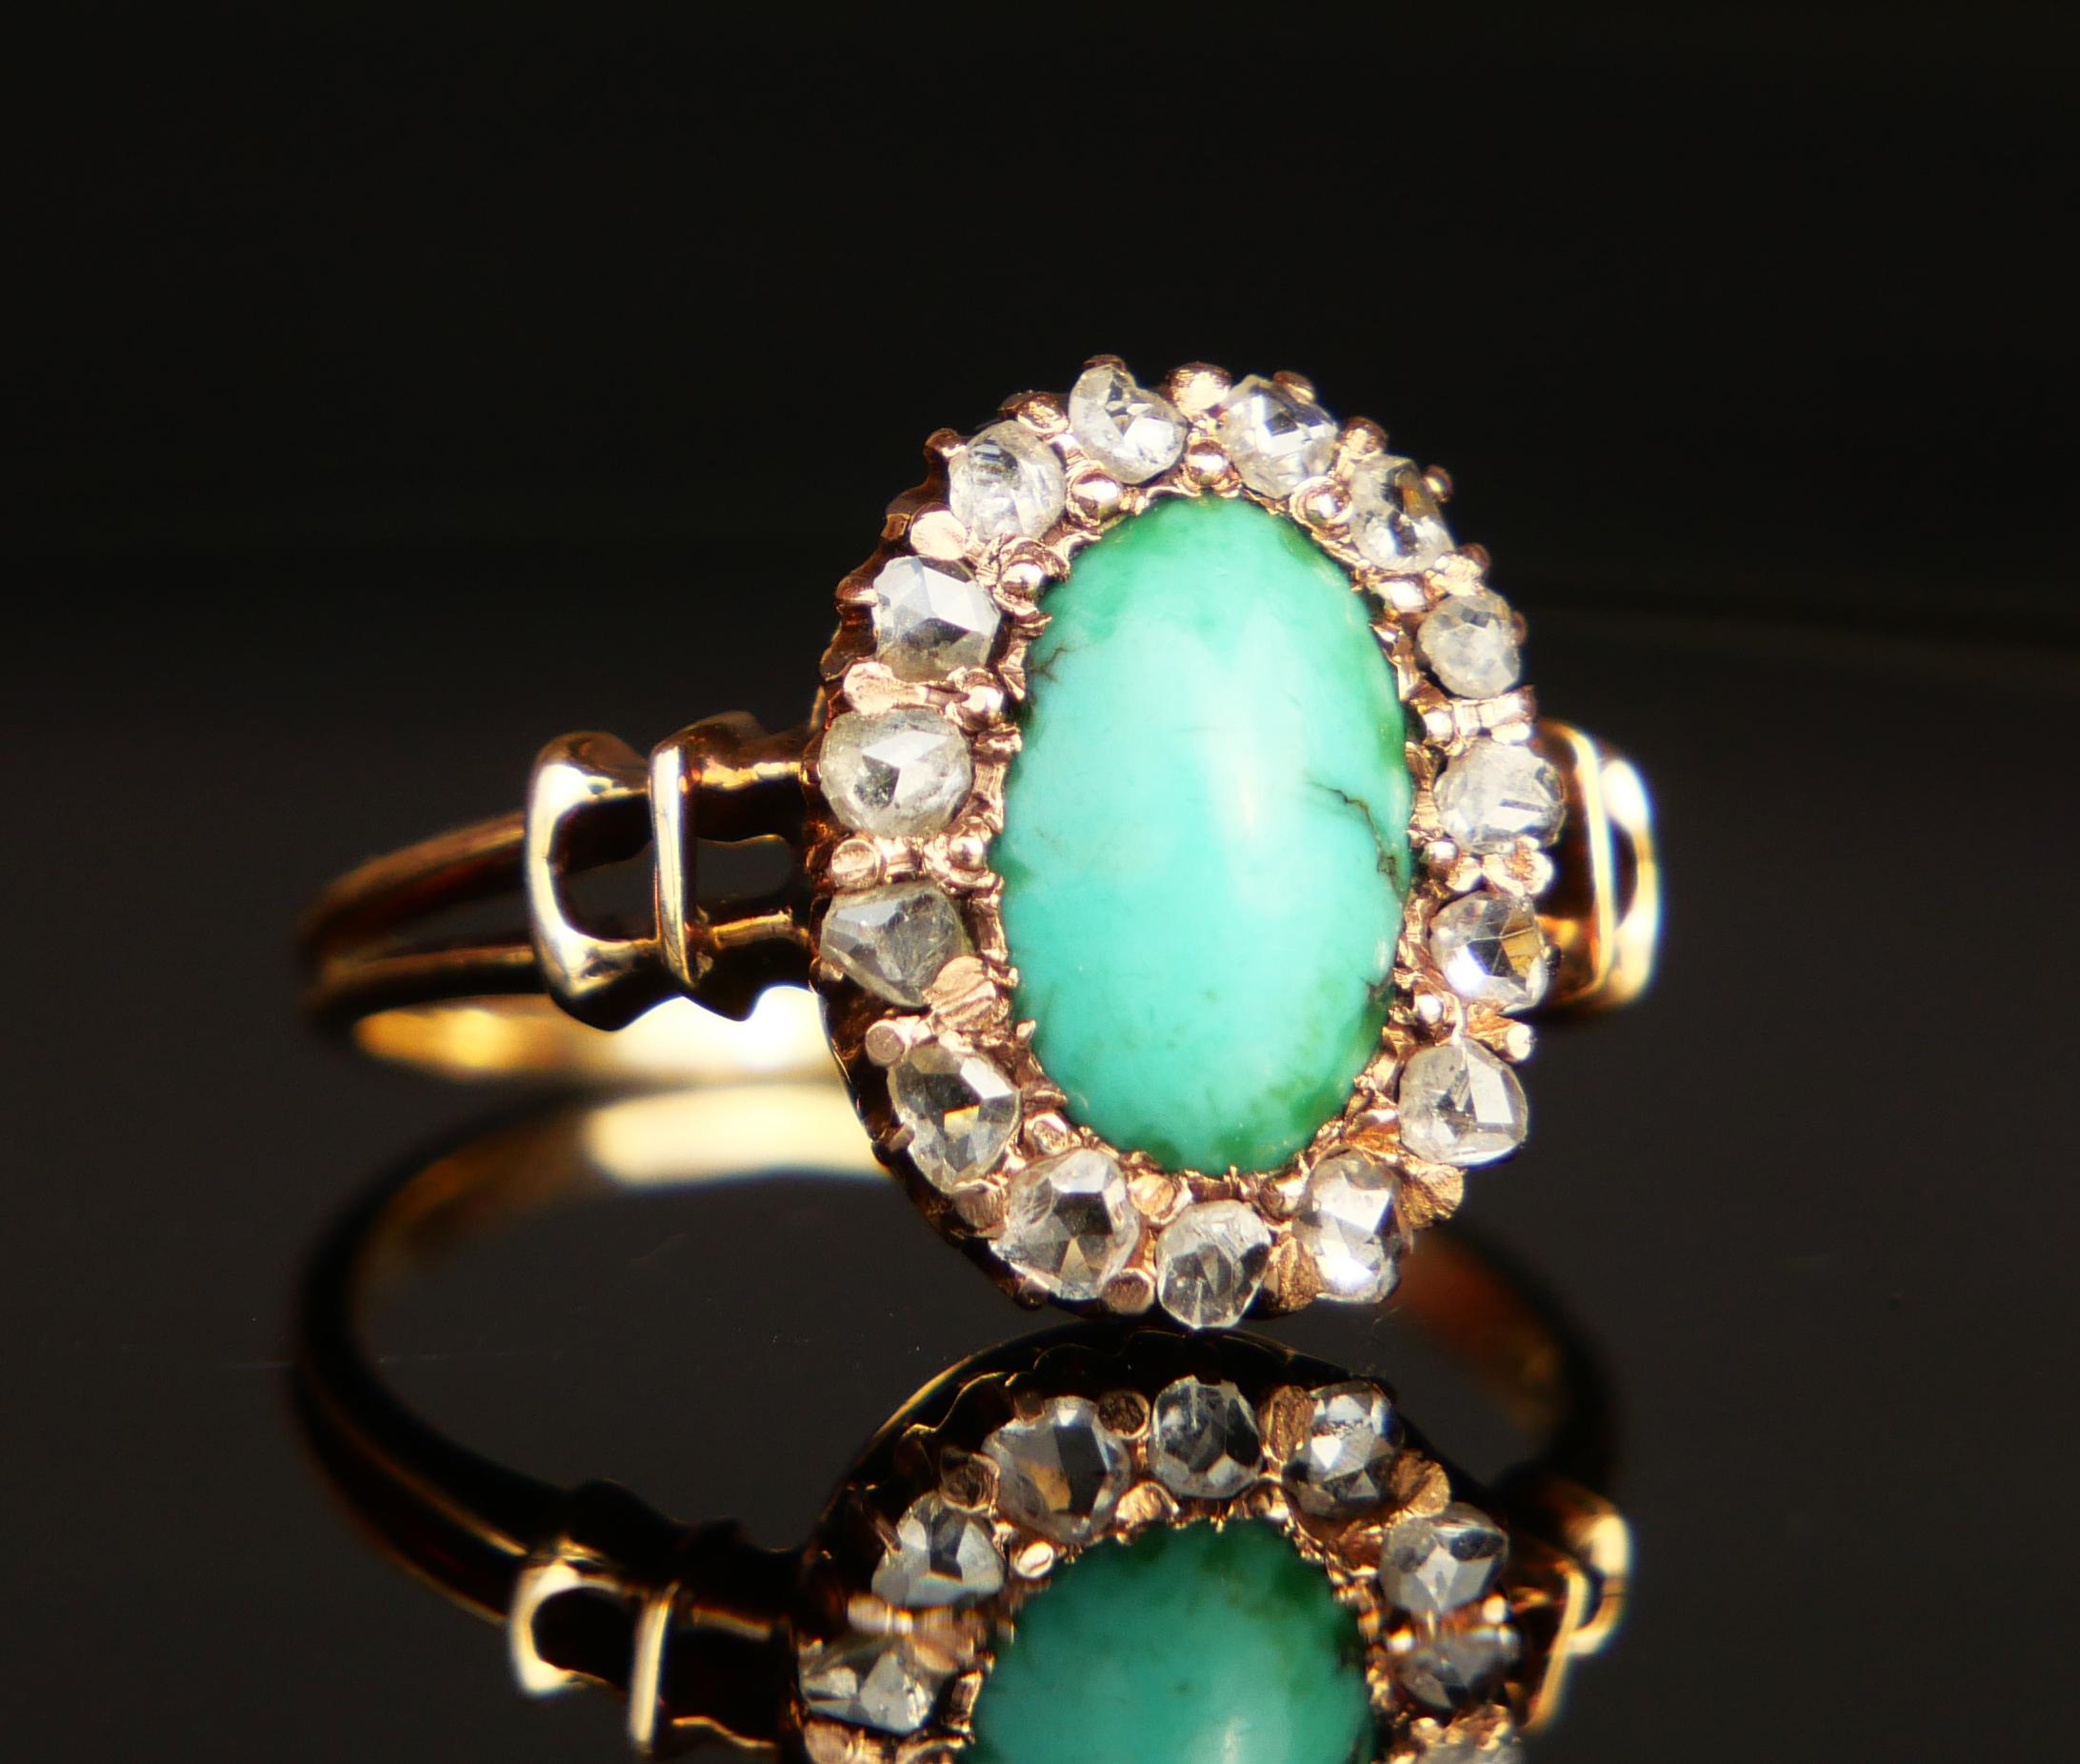 Arts and Crafts Antiquities German Halo Ring 2.25ct Turquoise Diamonds solid 14K GoldØ5US/2.3gr en vente